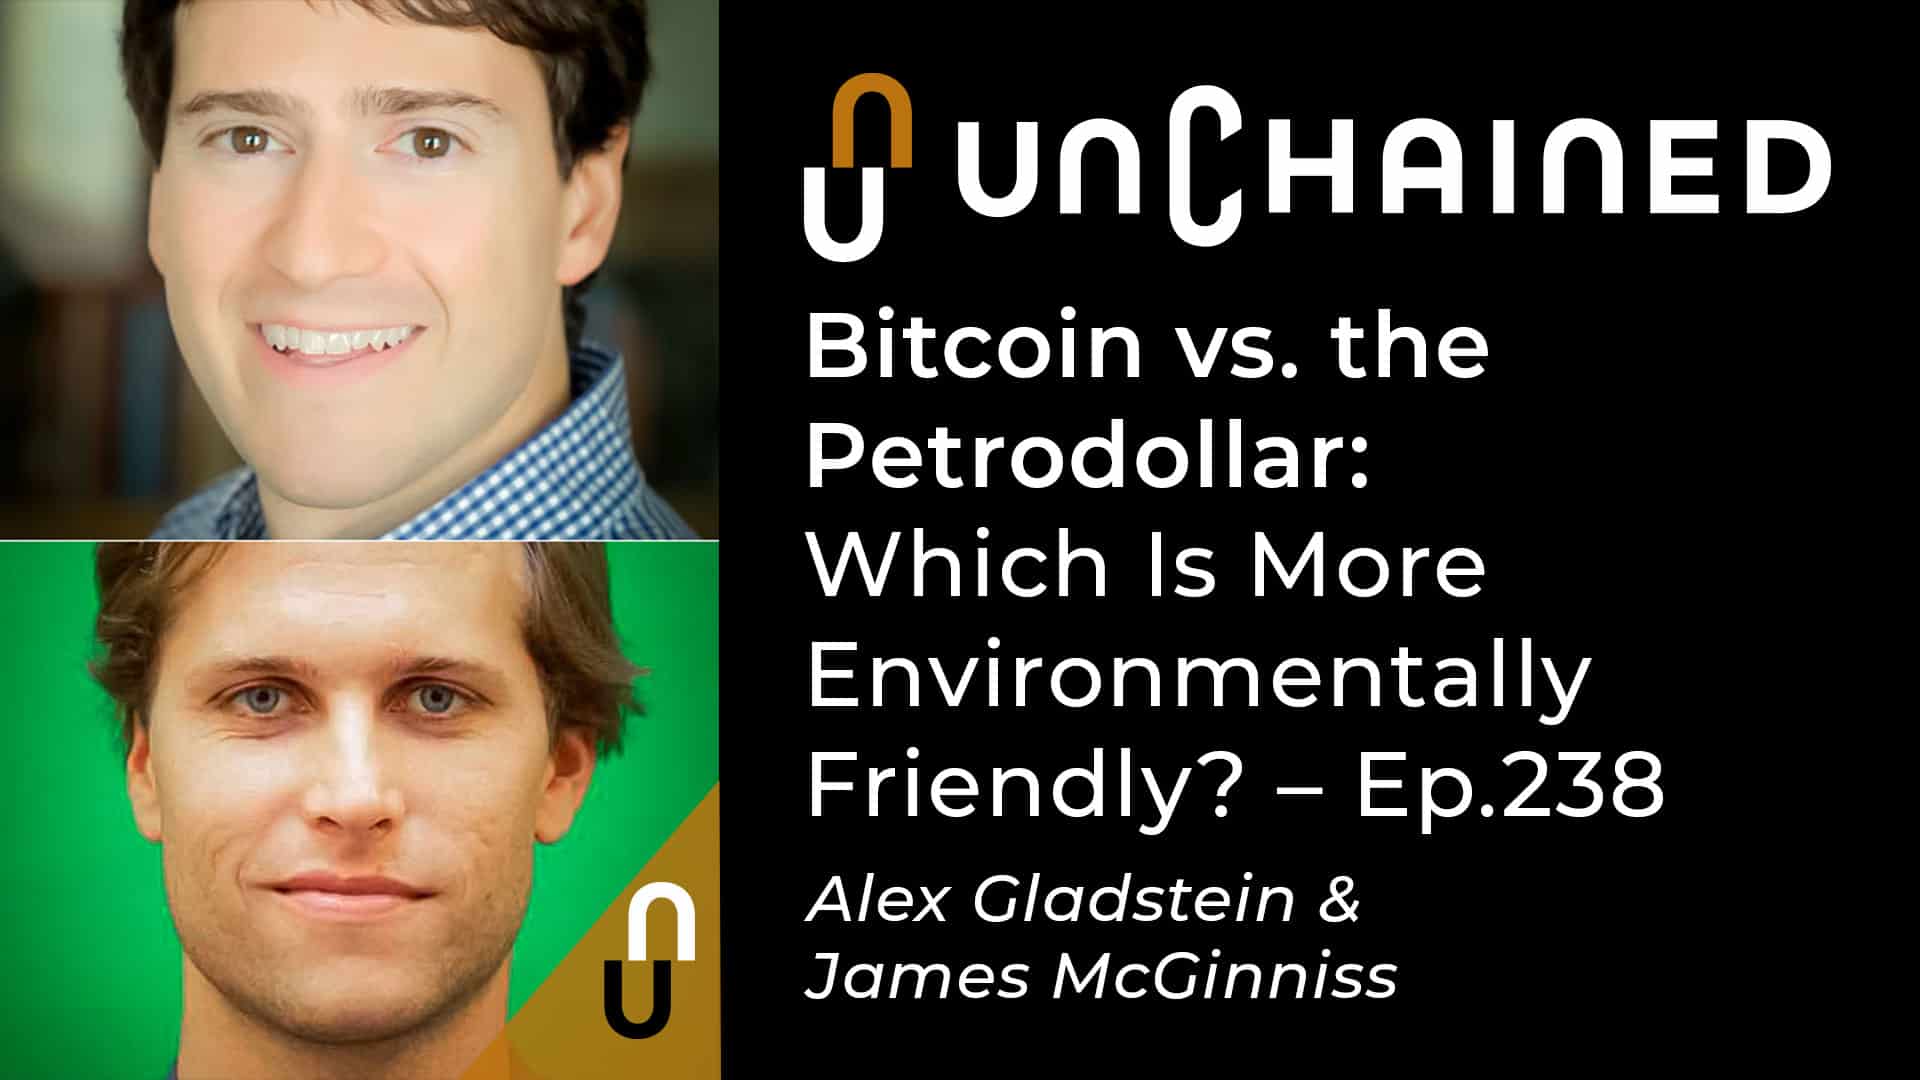 Unchained - Ep.238 - Bitcoin vs. the Petrodollar: Which Is More Environmentally Friendly